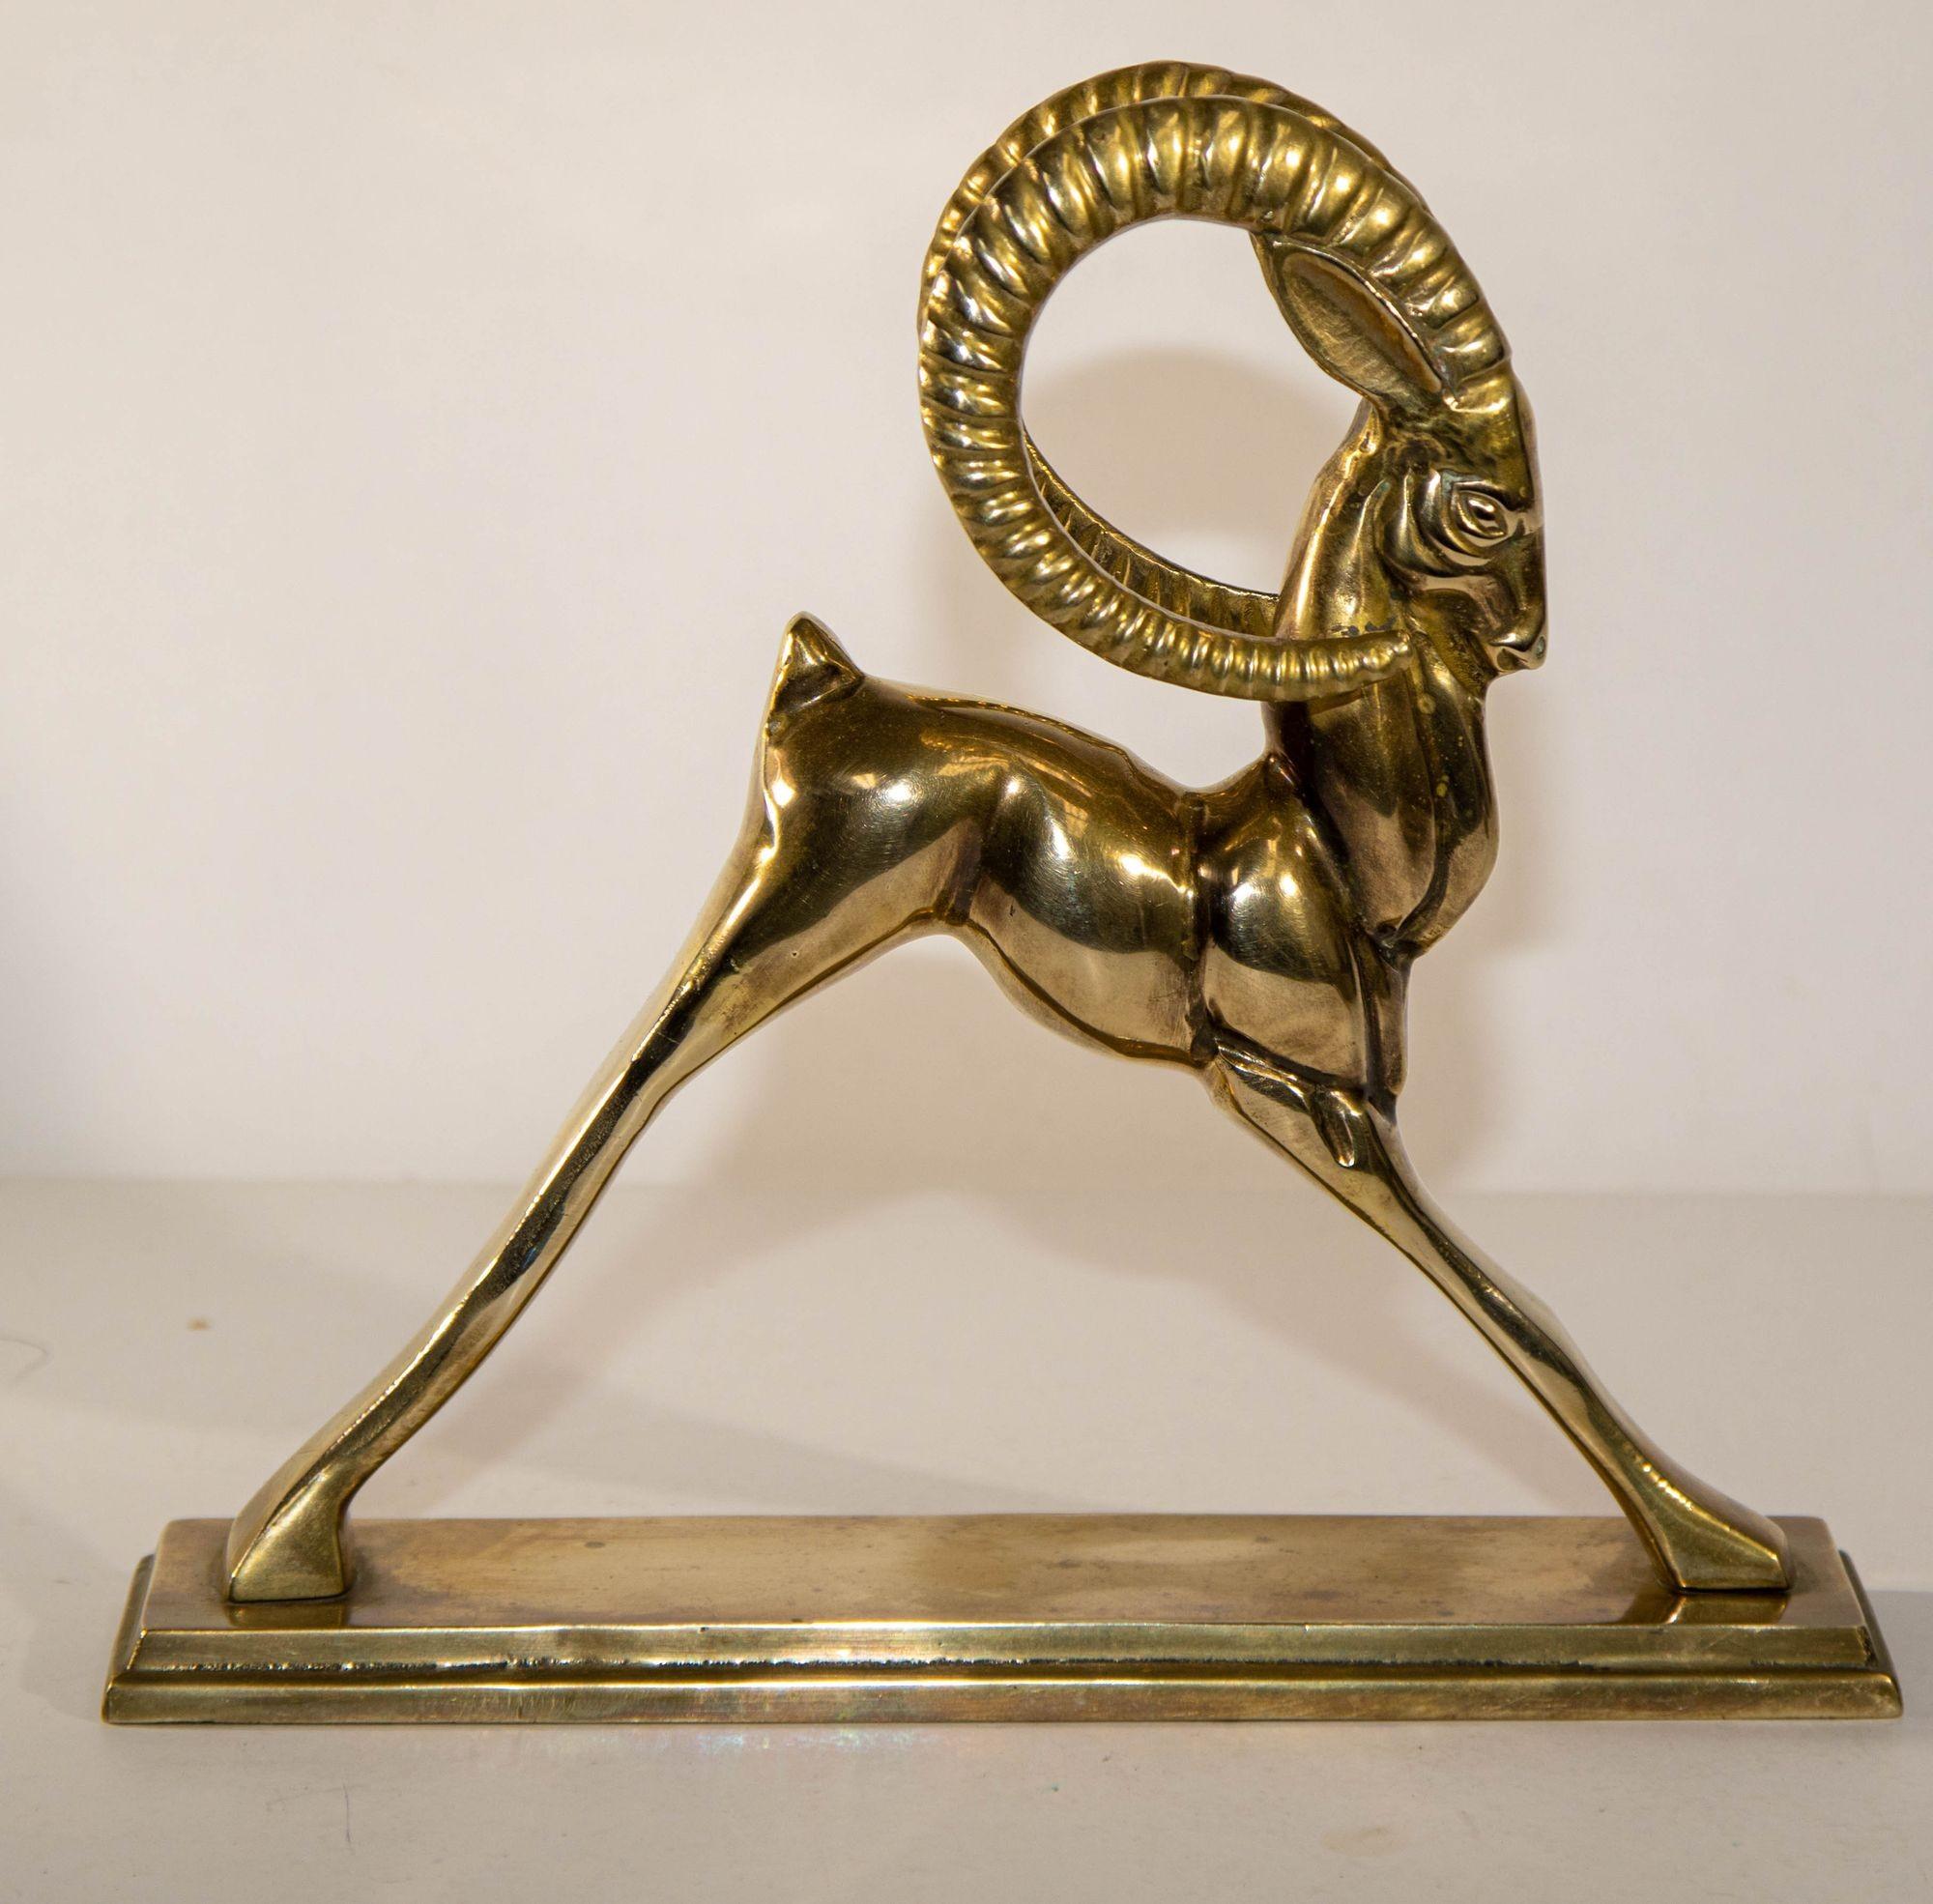 Vintage French Art Deco Style Sculpture of Brass Ibex Antelope.
Solid cast brass Ram decorative object or bookend, circa mid 20th century.
Beautiful elegant art Deco Hollywood Regency style cast brass ram, gazelle antelope sculpture mounted on a